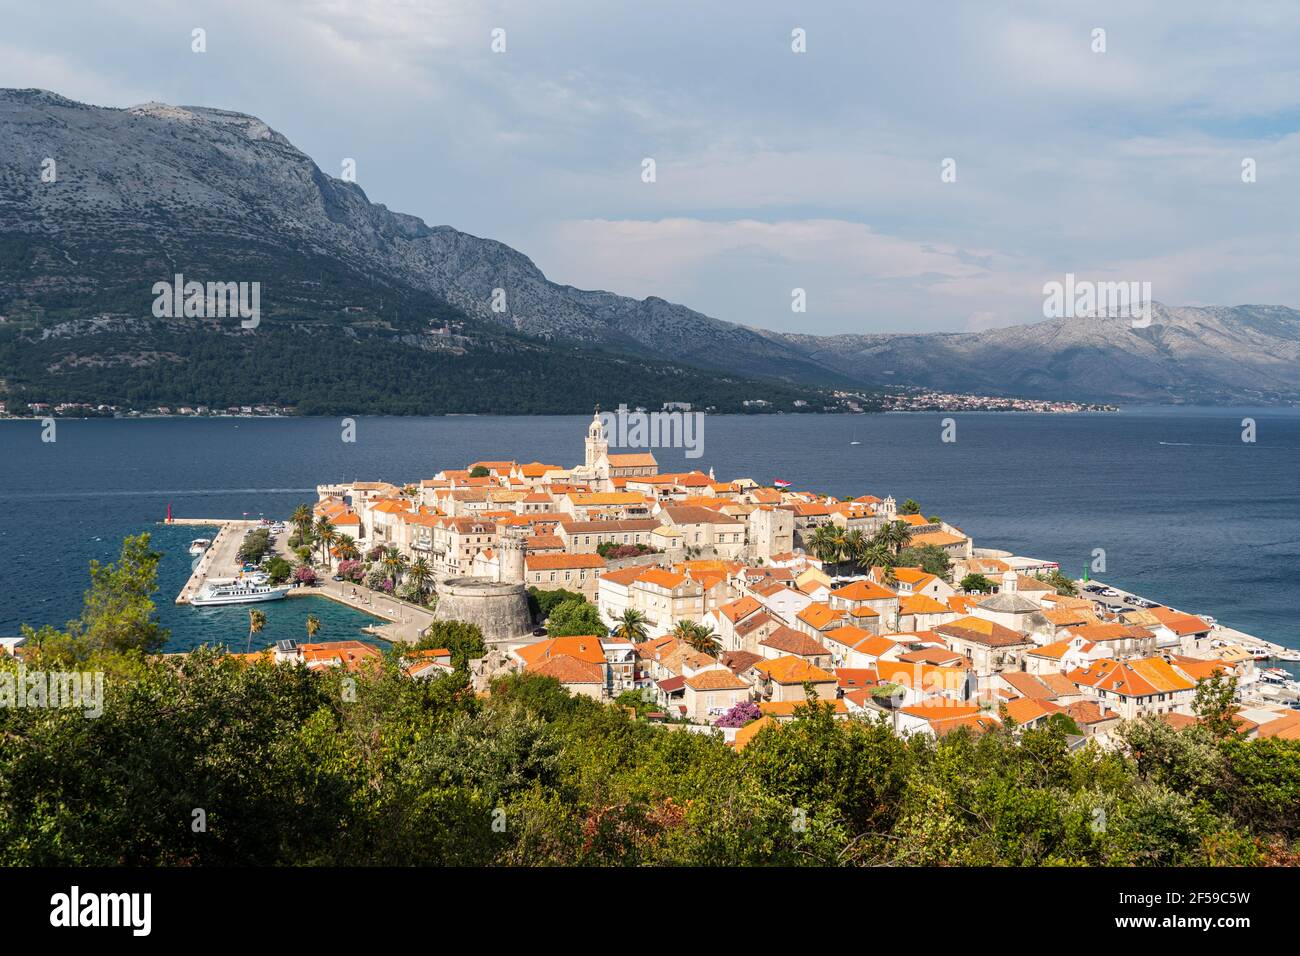 View of the Korcula old town, dating from Venetian times, from the hill overlooking the city by the Adriatic sea in Croatia Stock Photo